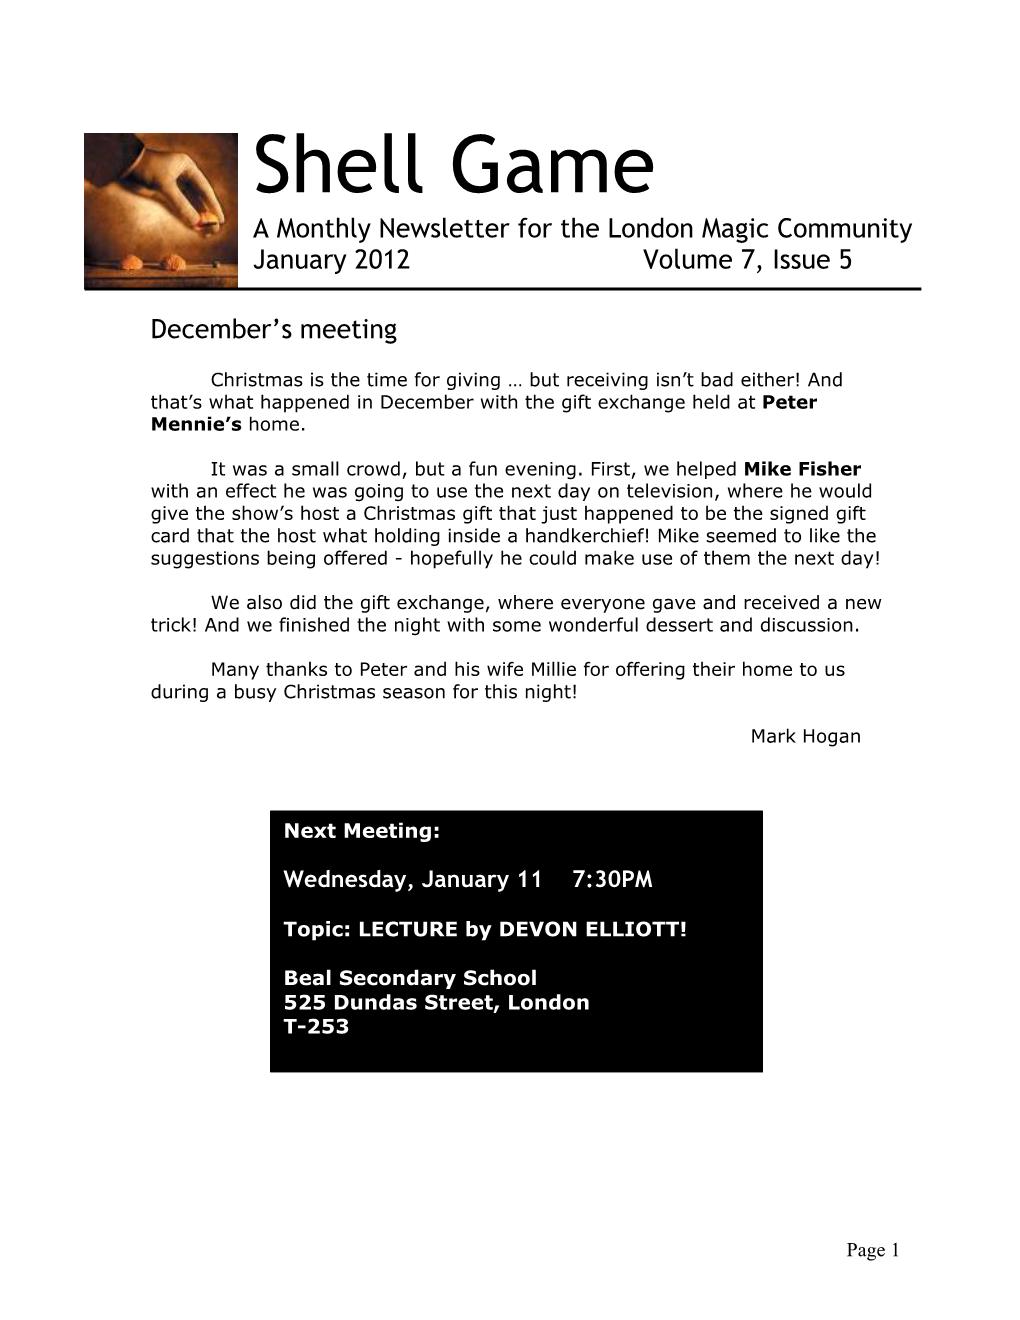 Shell Game a Monthly Newsletter for the London Magic Community January 2012 Volume 7, Issue 5